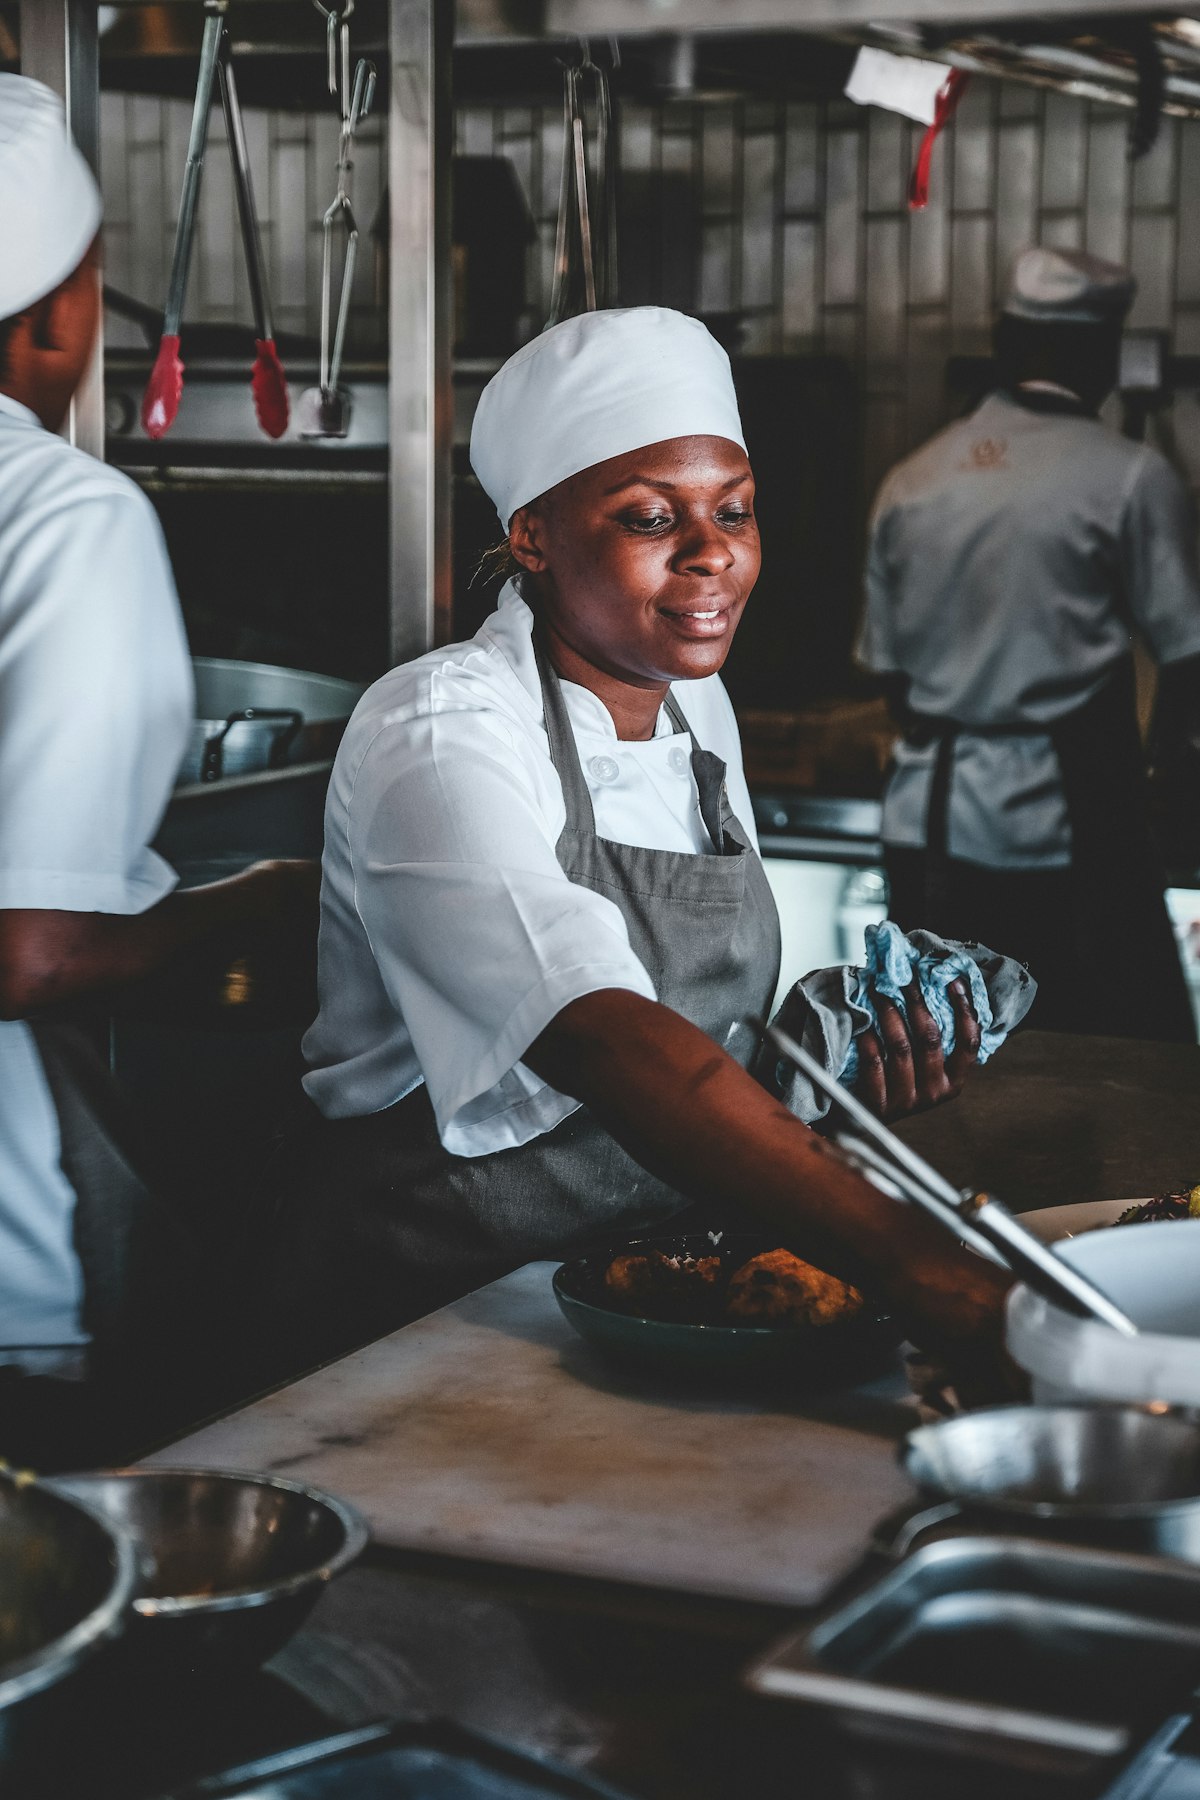 Heinz, Southern Restaurants for Racial Justice to provide $1M in grants to support Black-owned restaurants for the third straight year